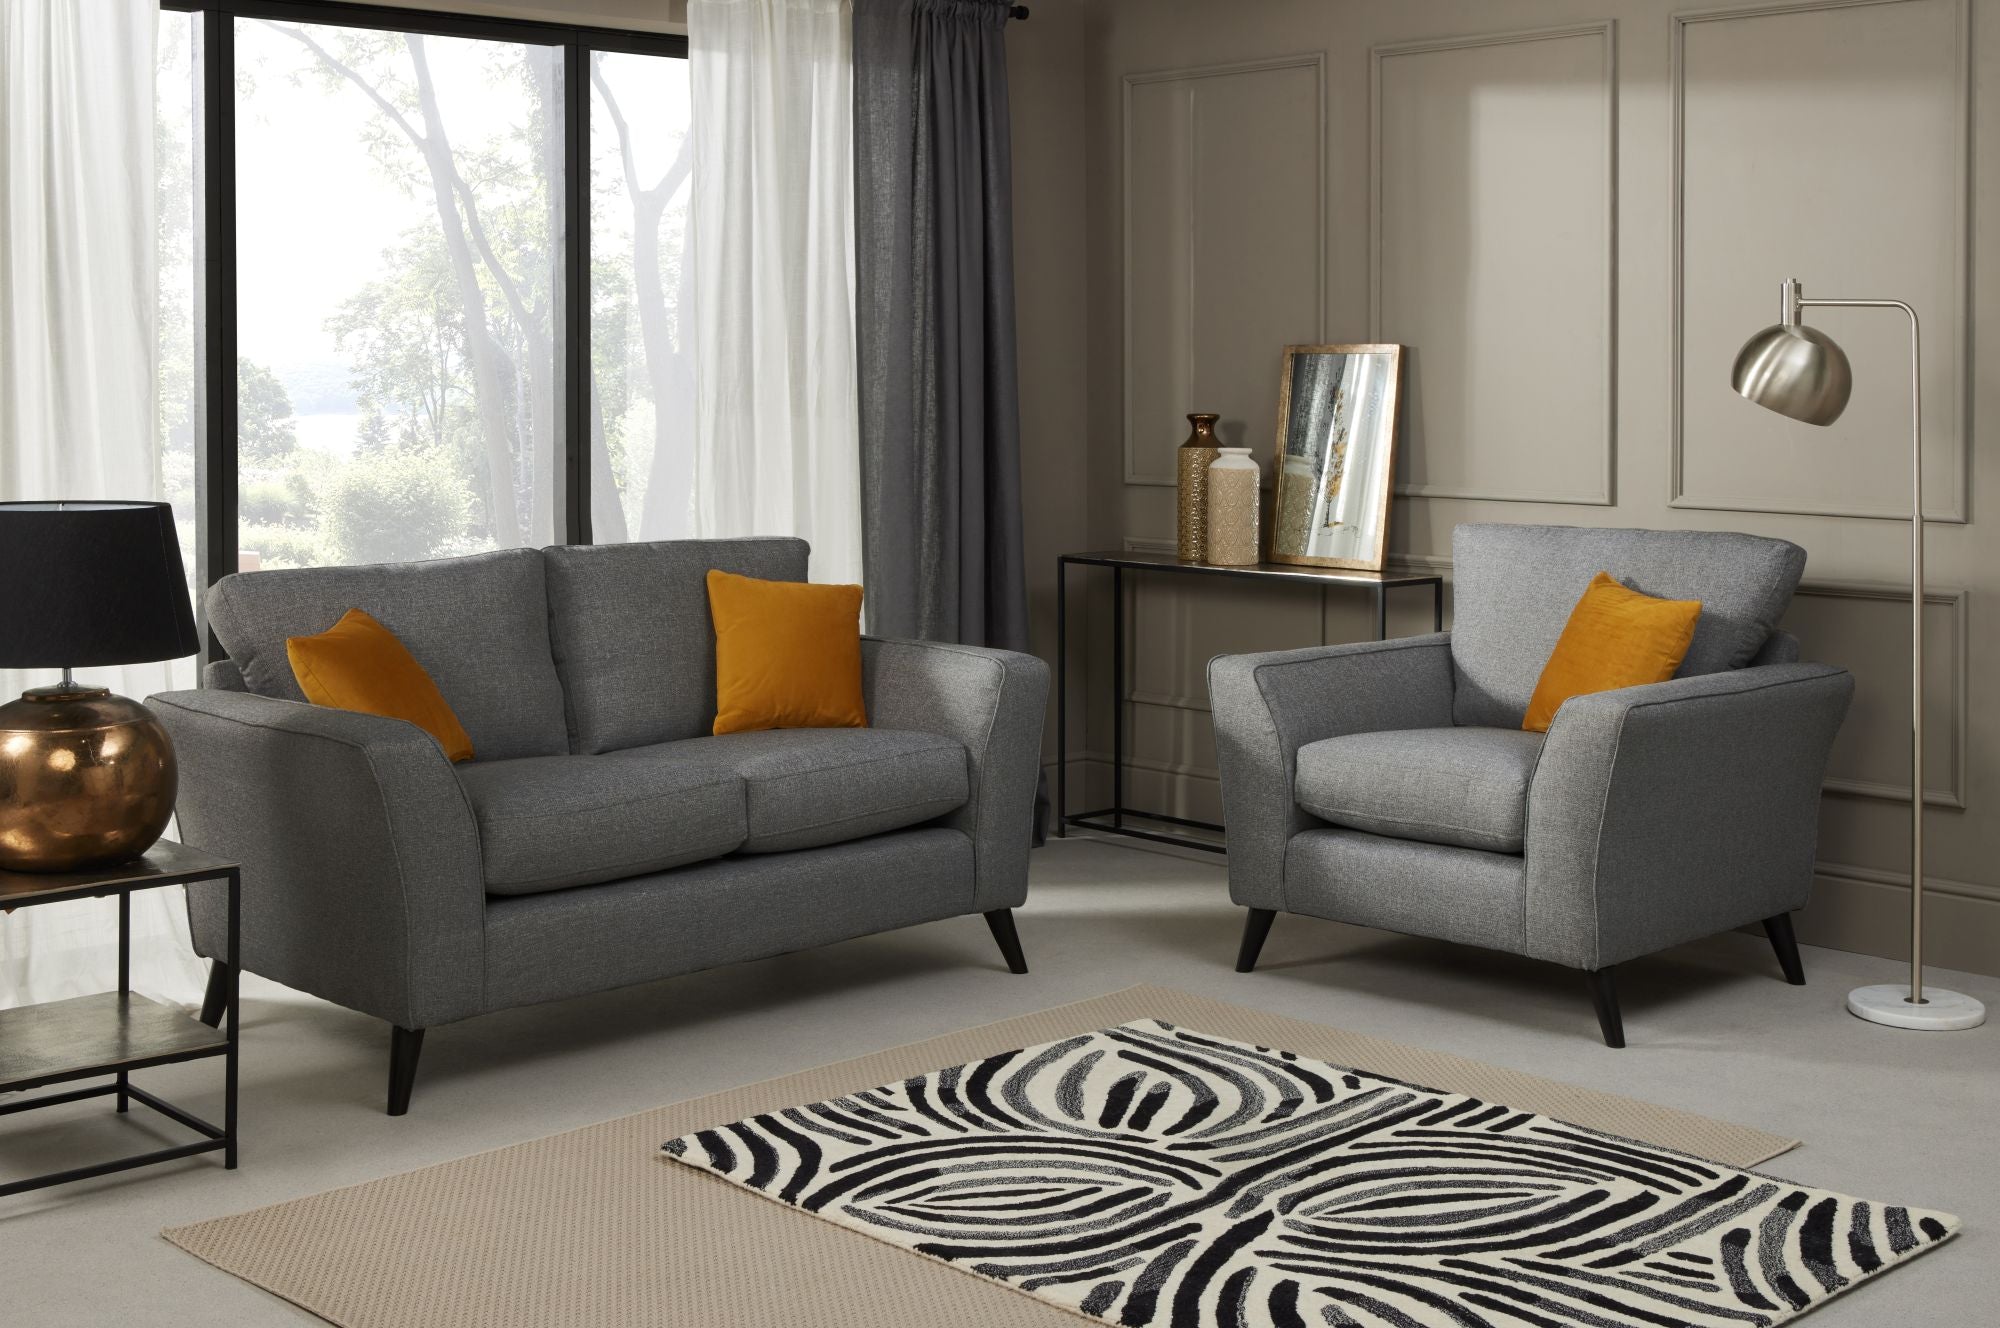 Libby 2 seater sofa and Armchair in Charcoal show in a room setting 